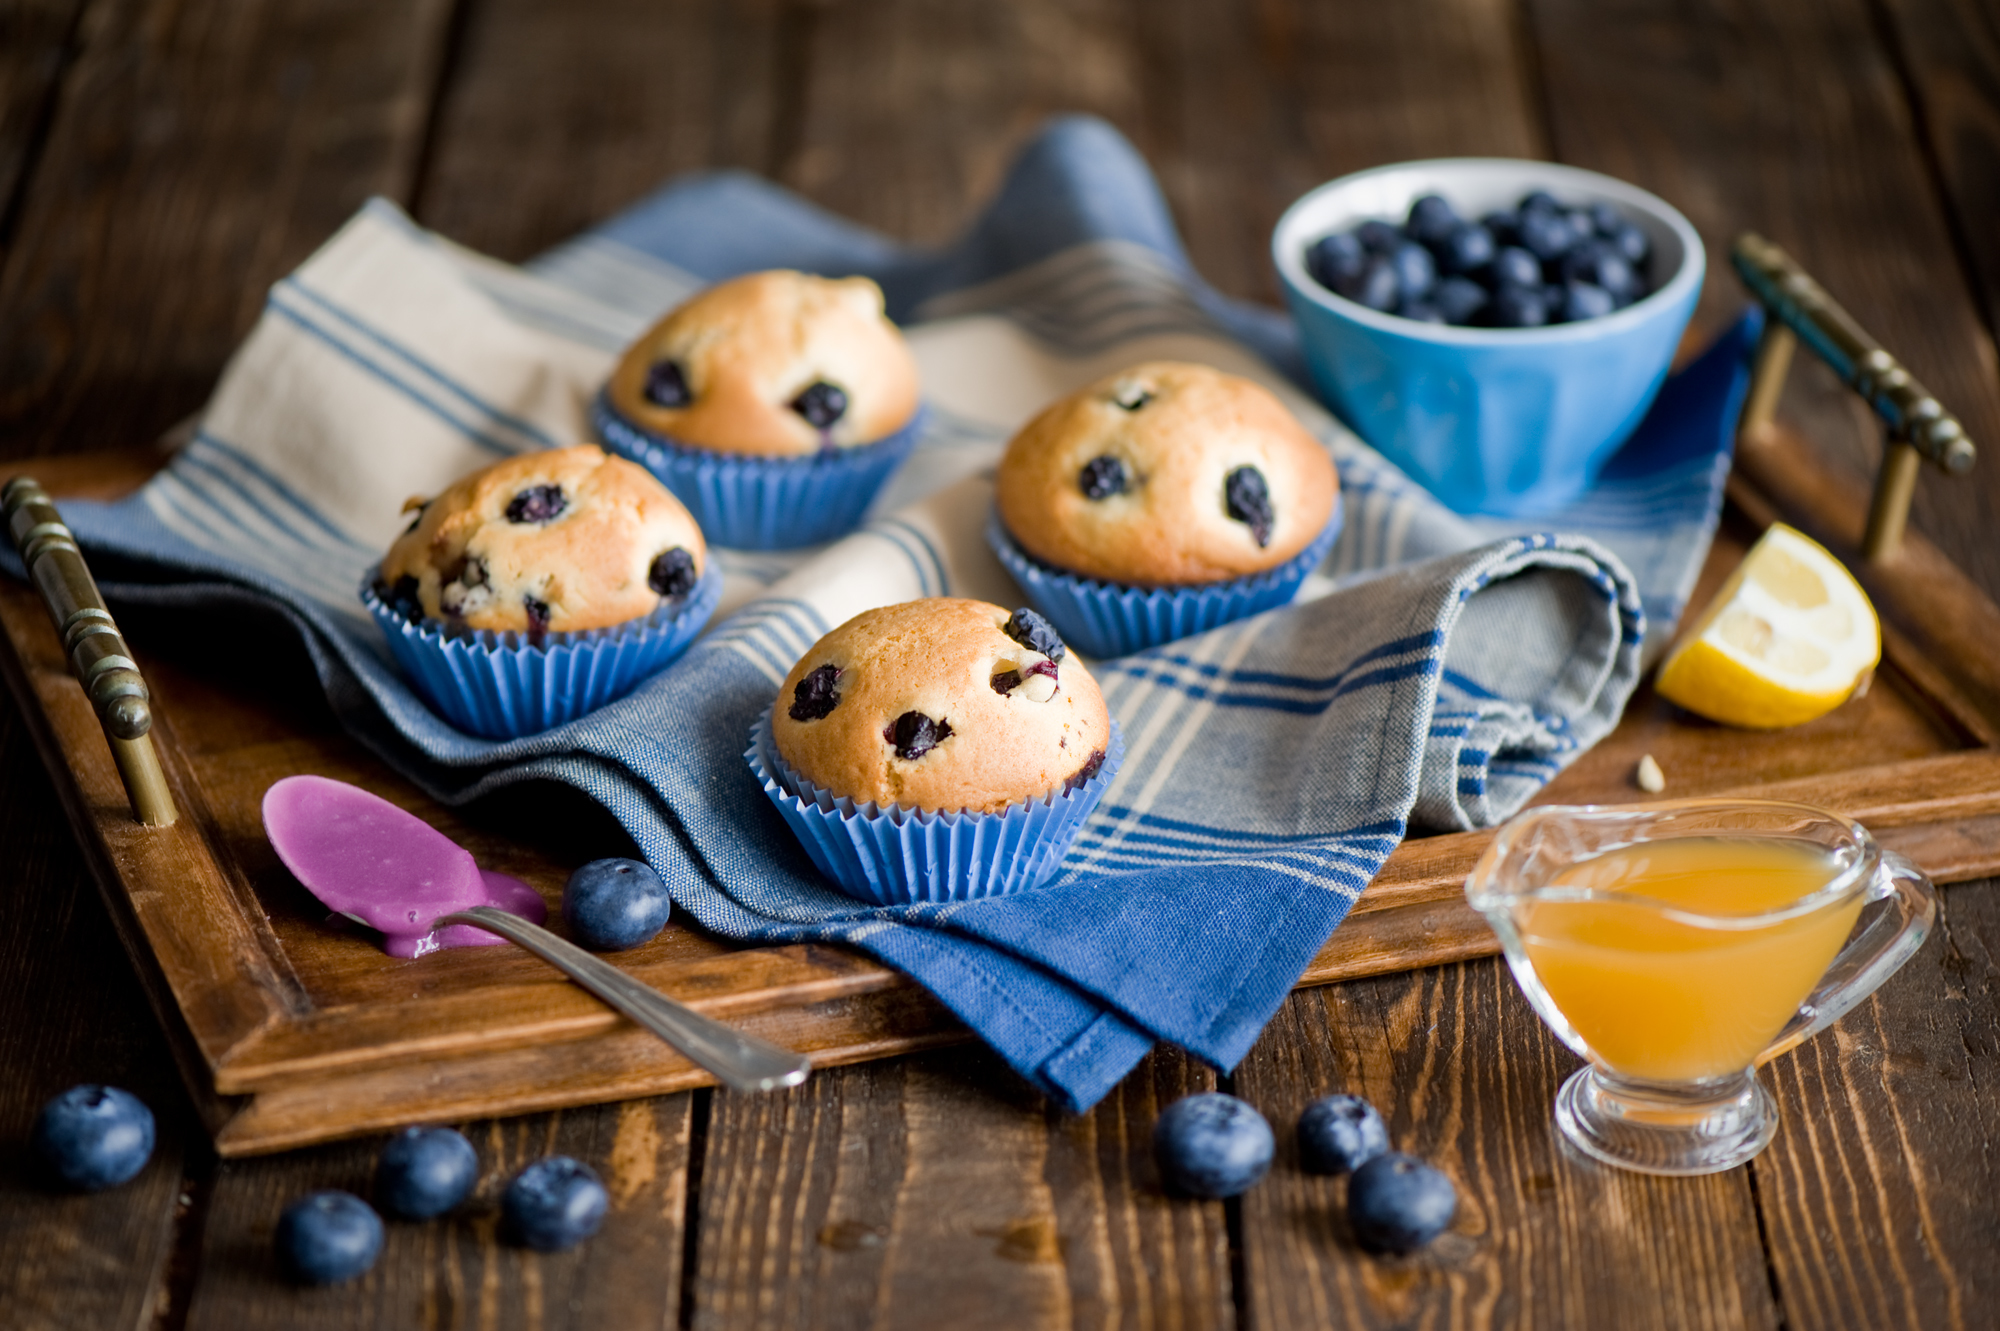 Muffin HD Wallpaper Background Image